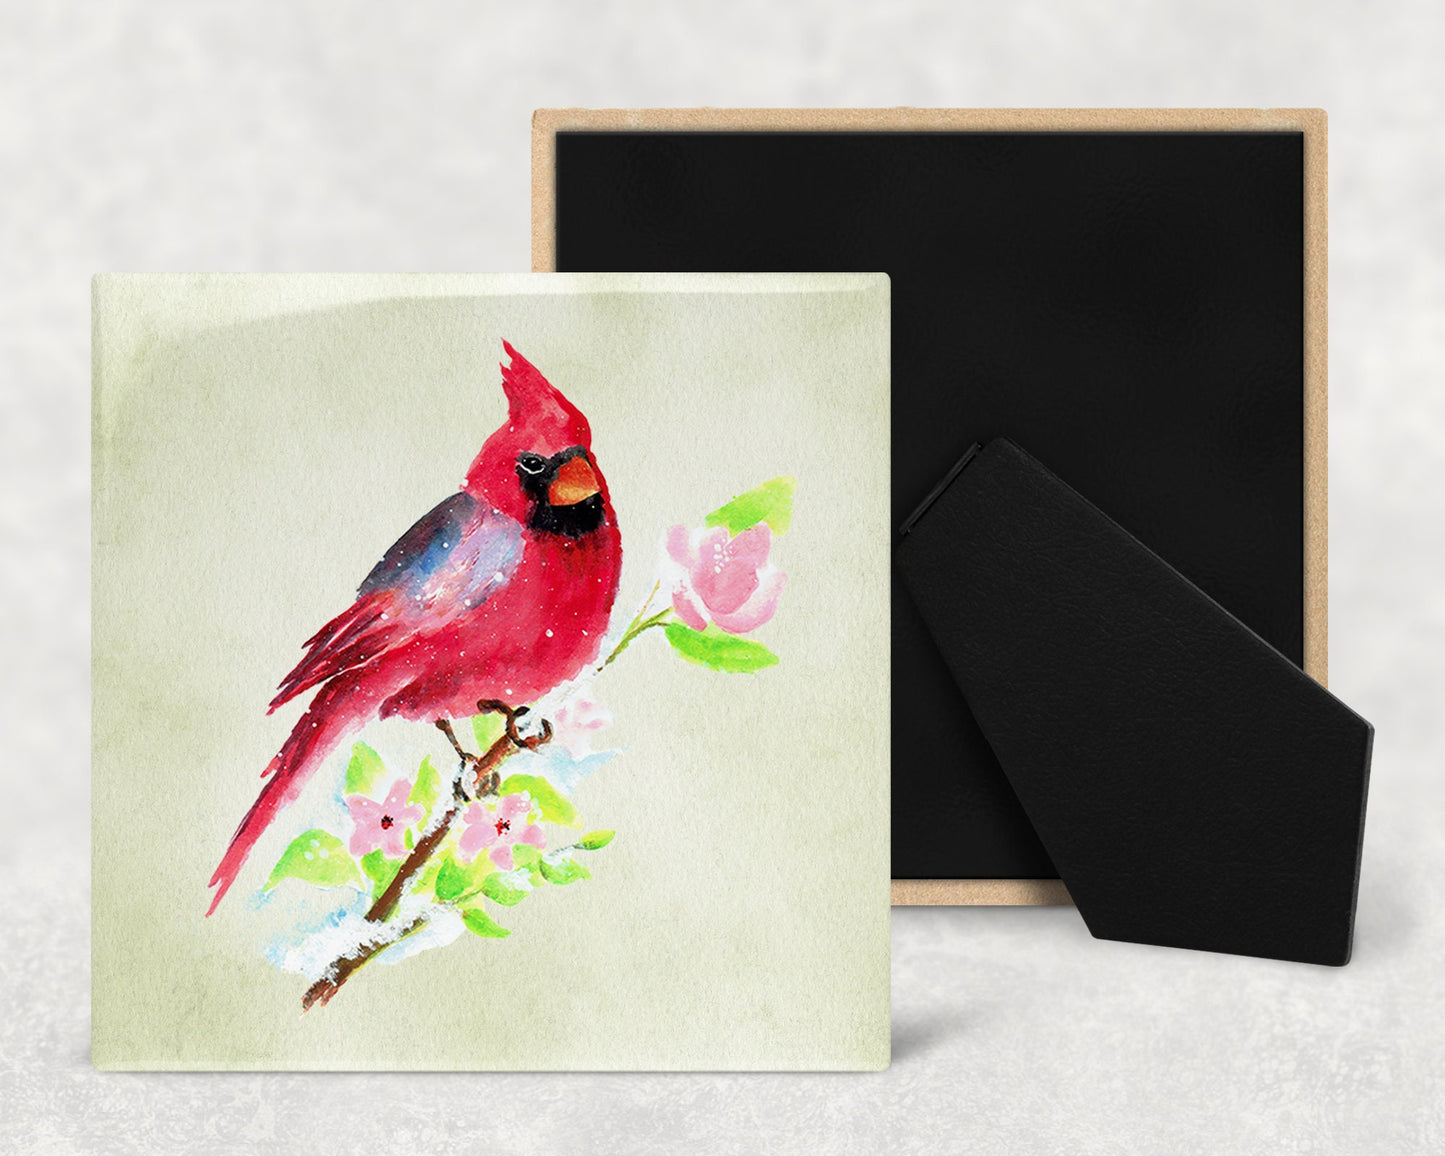 Beautiful Cardinal Art Decorative Ceramic Tile with Optional Easel Back - Available in 3 Sizes